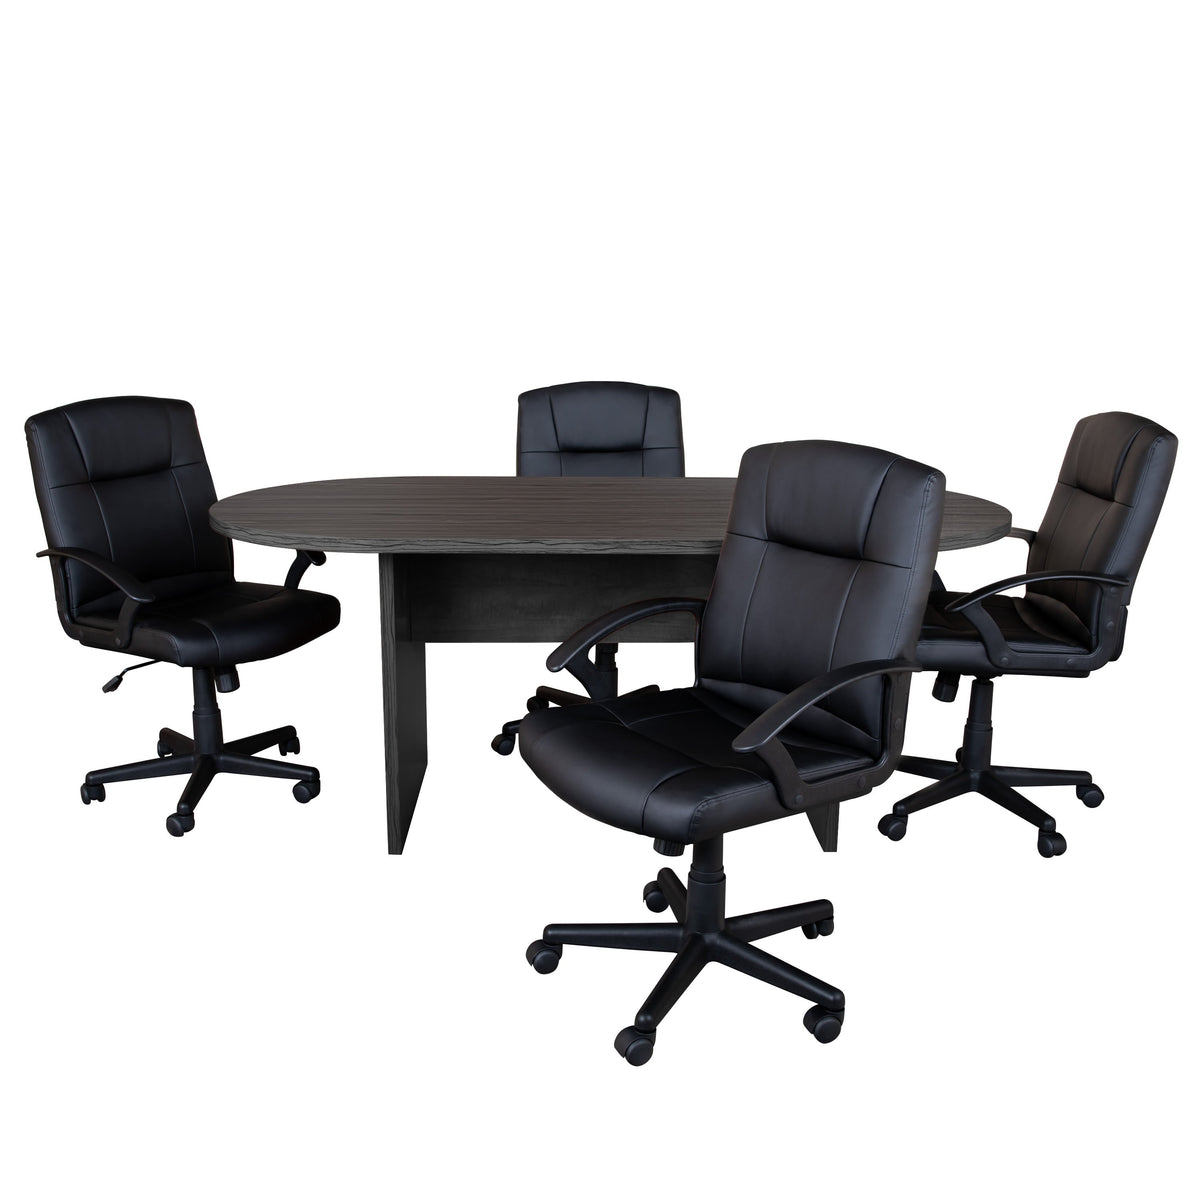 Rustic Gray |#| 5 Piece Rustic Gray Oval Conference Table with 4 Black LeatherSoft-Padded Chairs